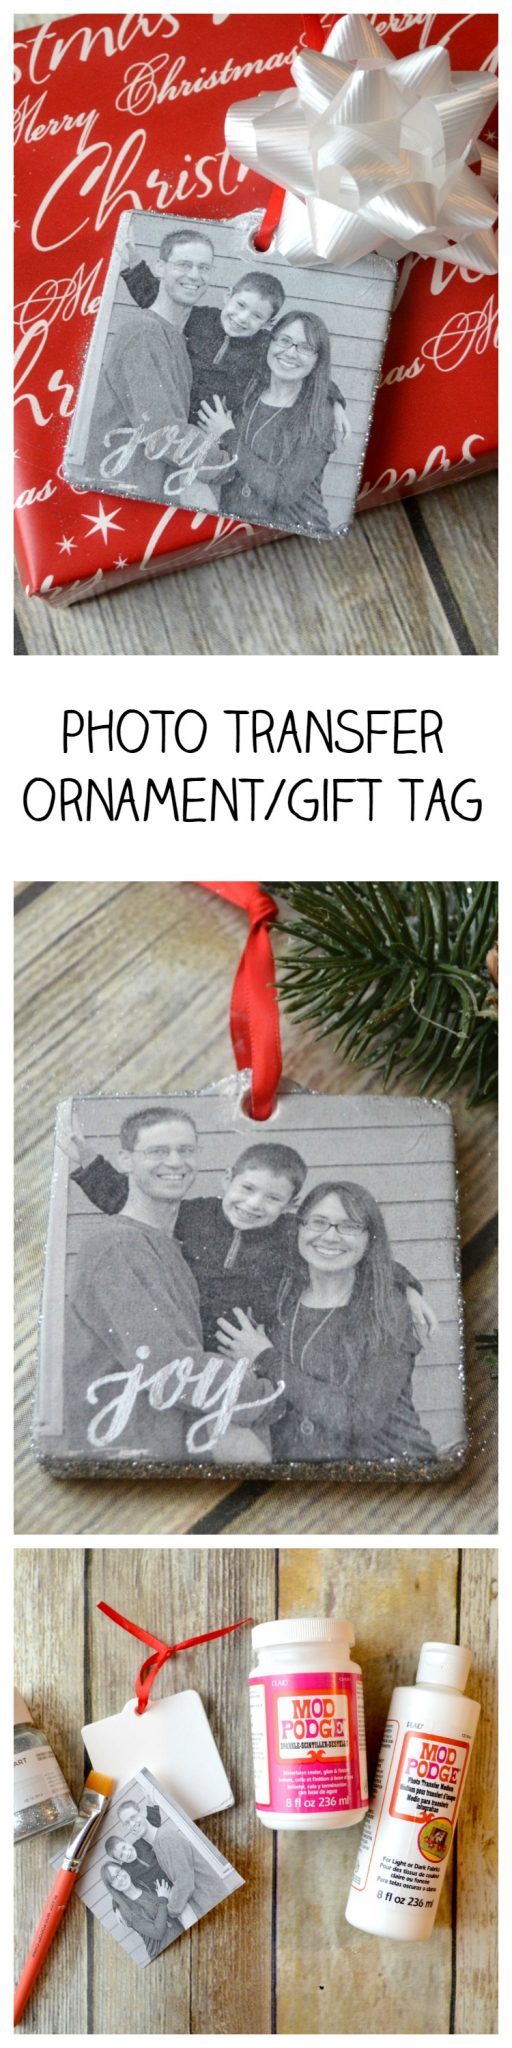 Photo Transfer Ornament and Gift Tag